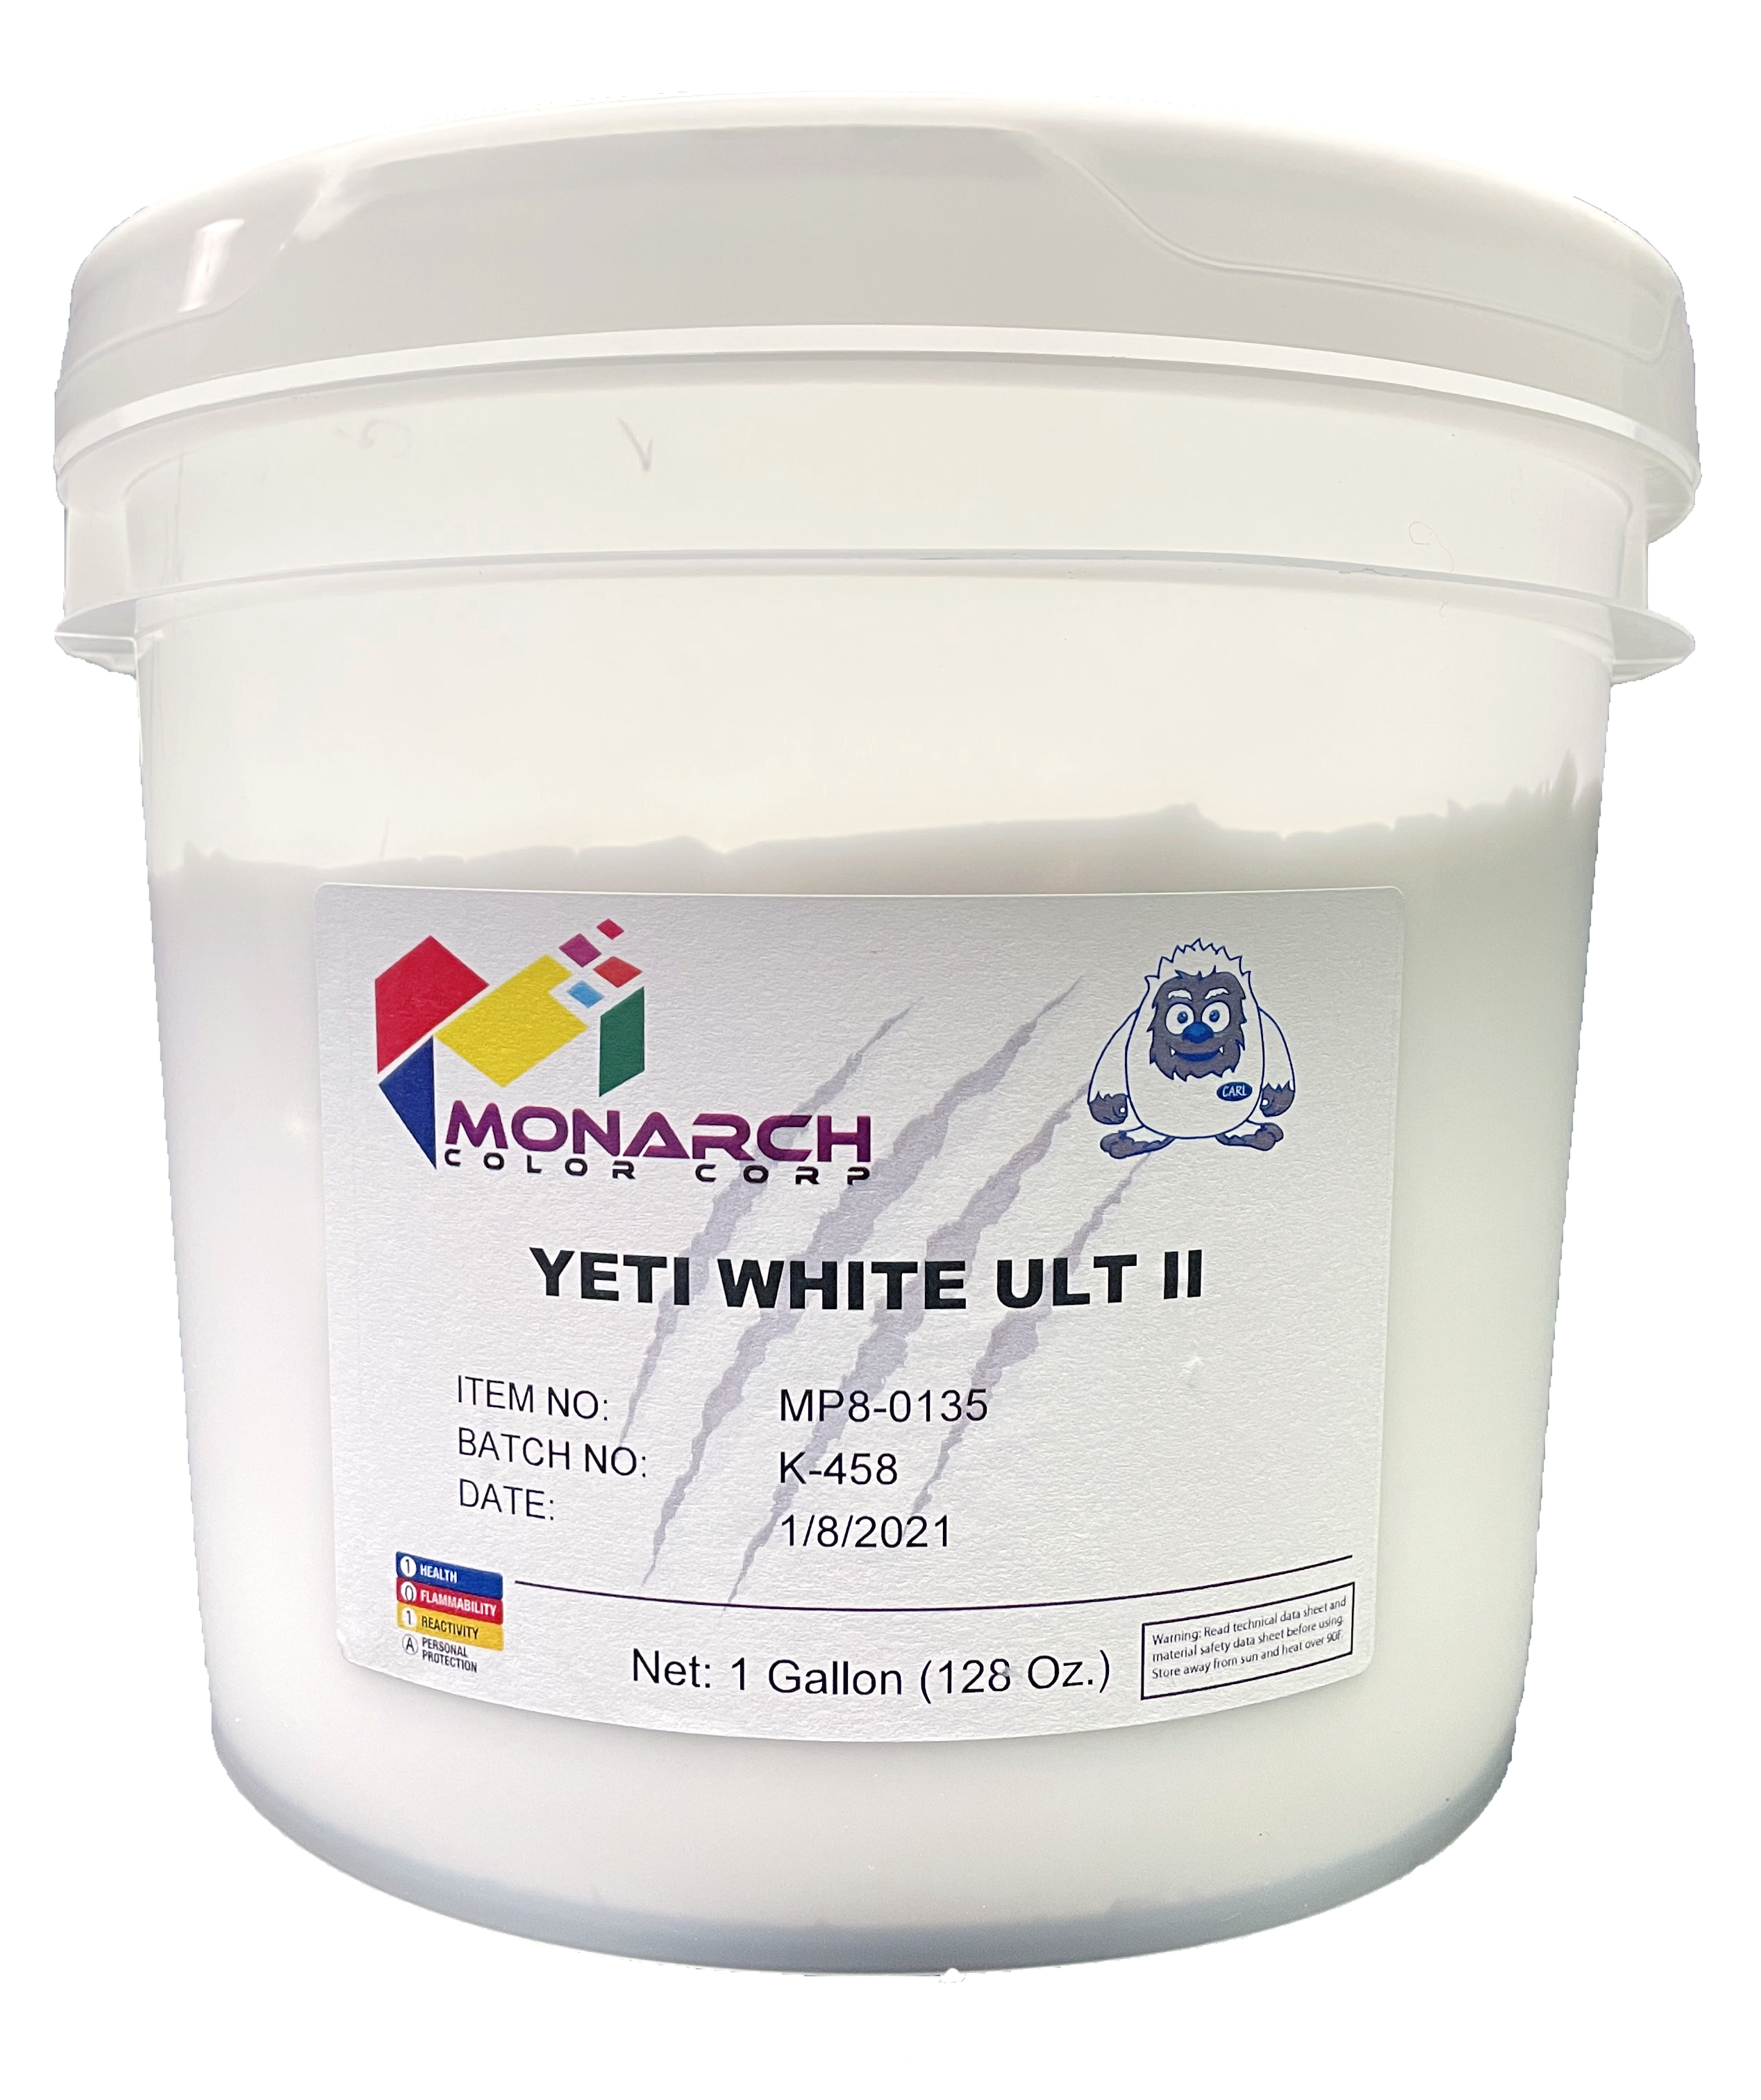 Yeti ULT II White is a great low temperature white with great opacity and soft hand. It is a non-phthalate bright opaque high performance white with great bleed resistance when printing on 100% polyester fabrics. ULT II also makes a great hot peel transfer ink. Especially when combined with our low-temp transfer adhesive that transfers at 260° F.